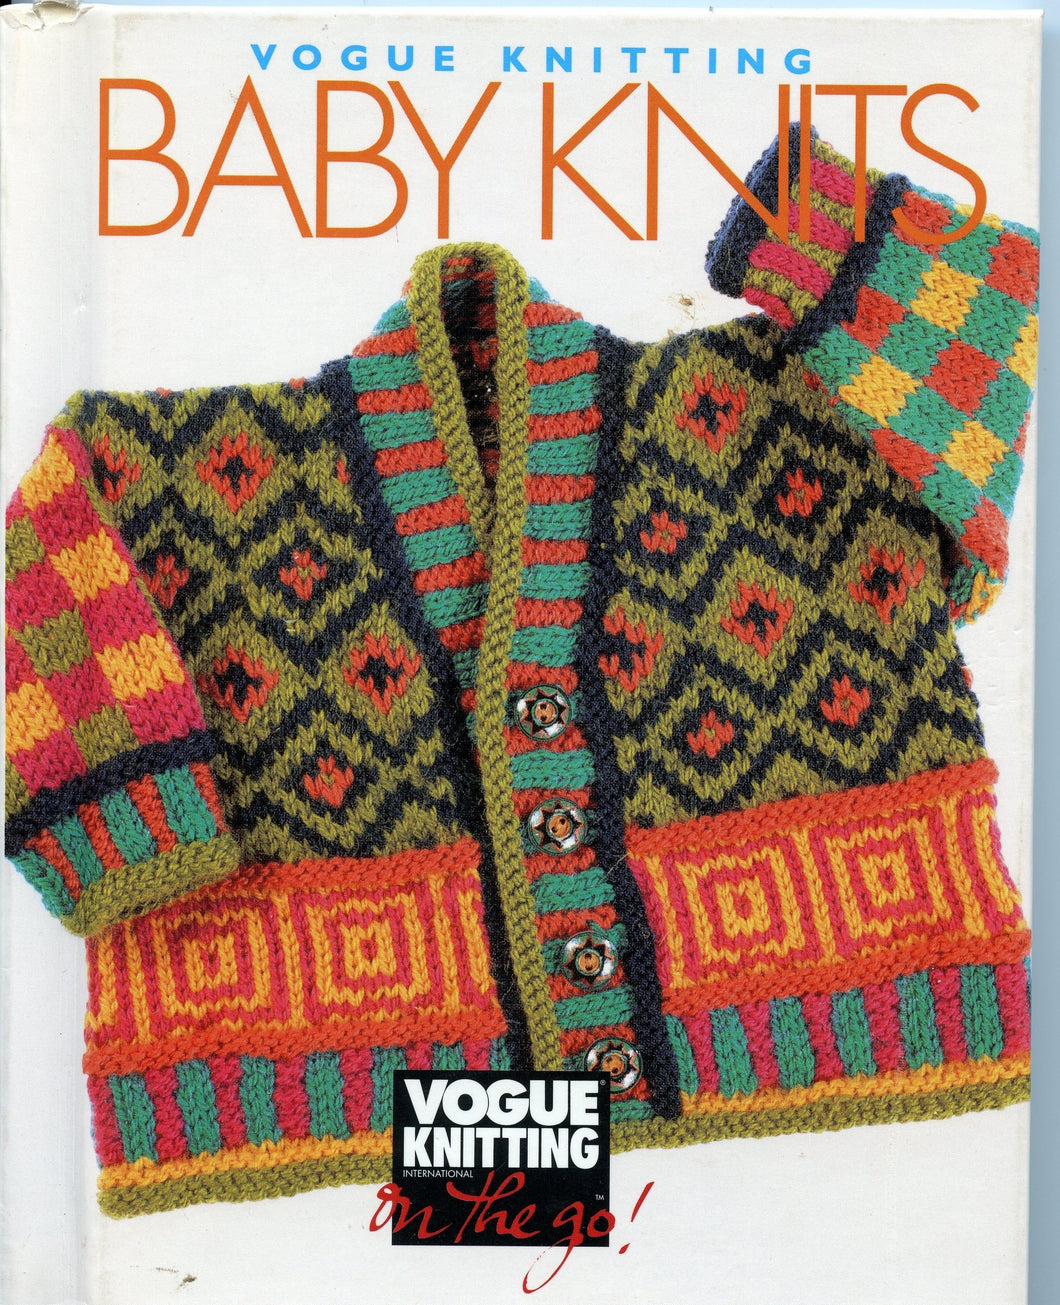 Vogue Knitting Baby Knits On the Go